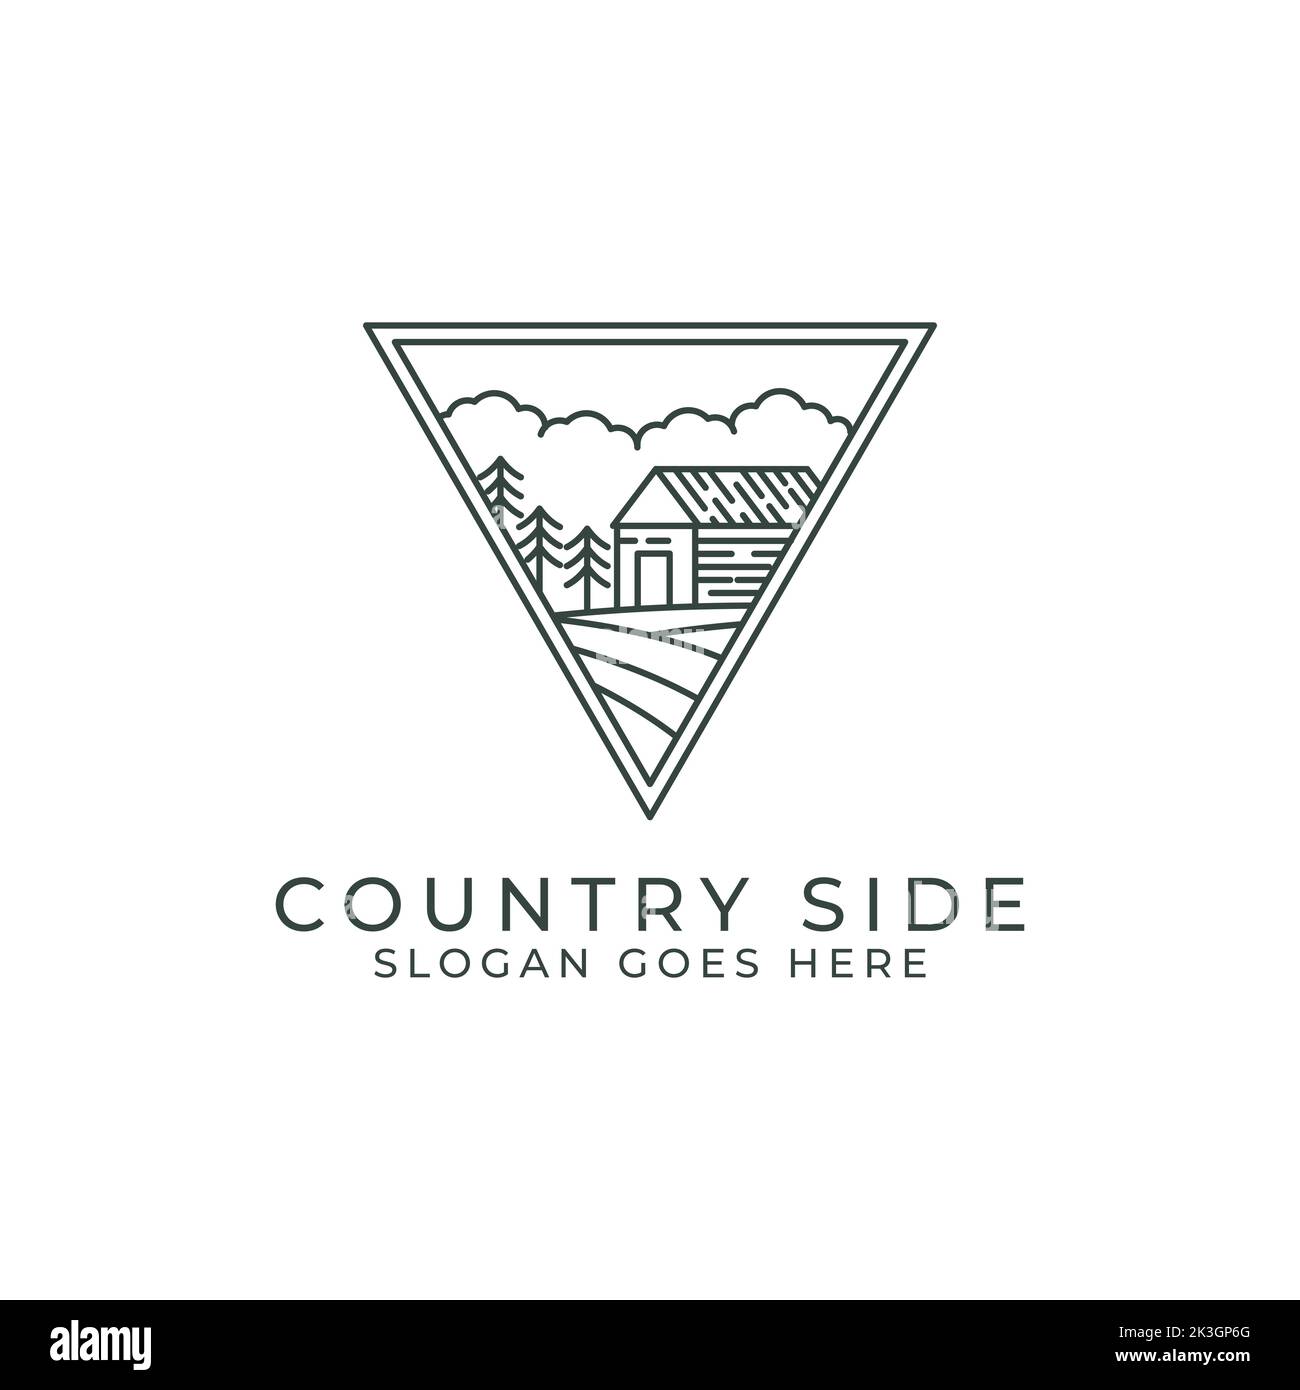 Country side outline logo design vector with triangle shape. line art with cabins in agriculture landscape vector Stock Vector